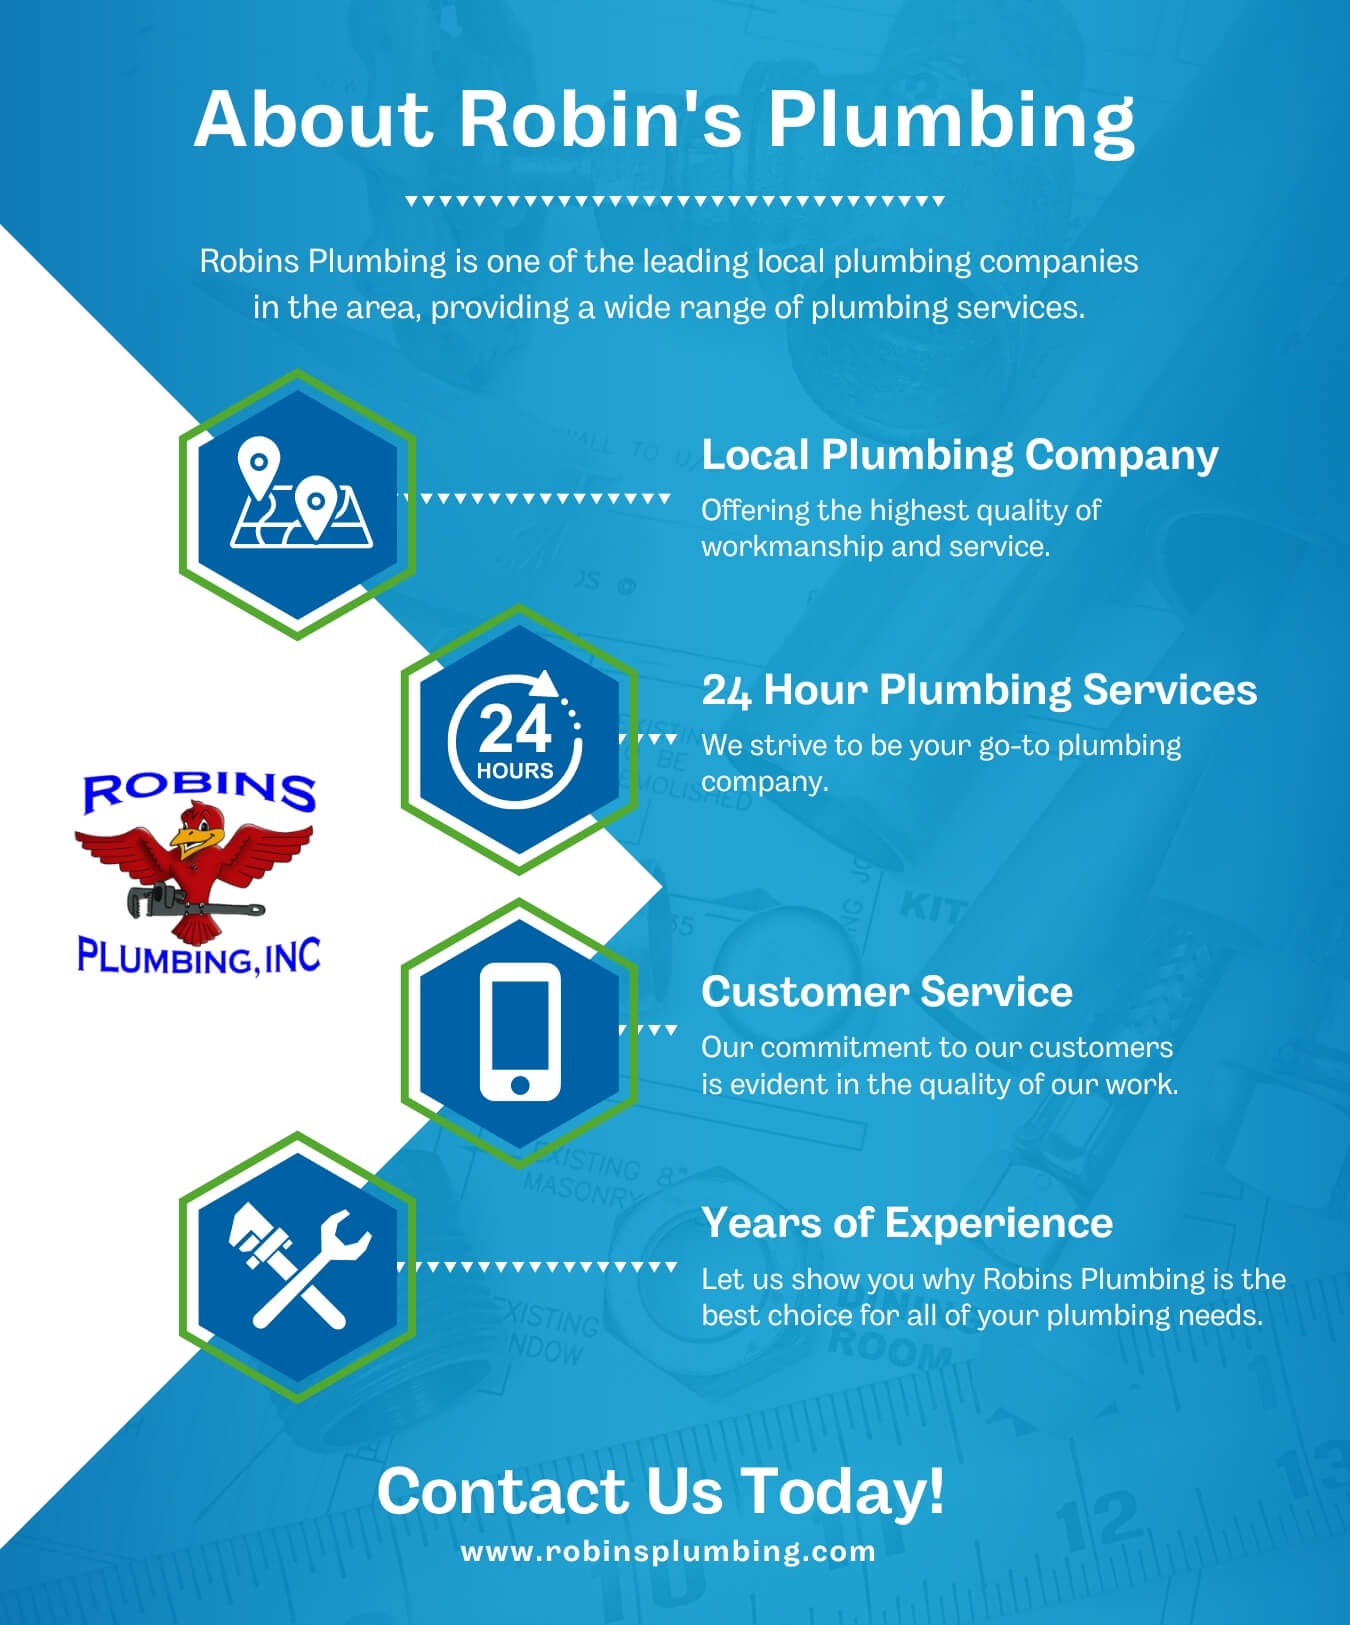 About Robins Plumbing Infographic